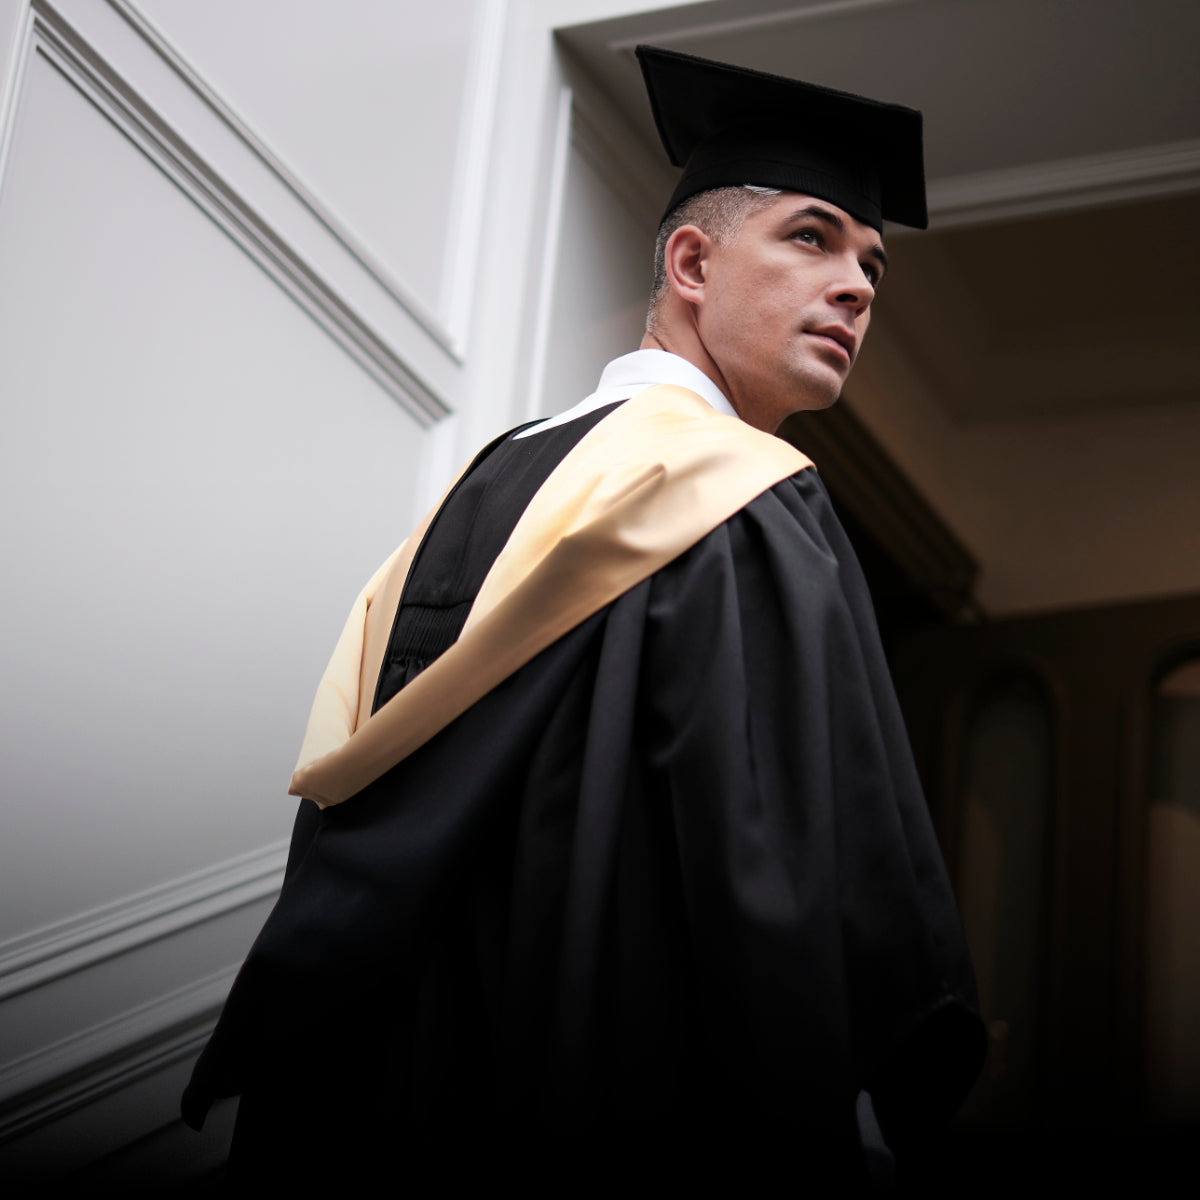 30000 Cap And Gown Pictures  Download Free Images on Unsplash